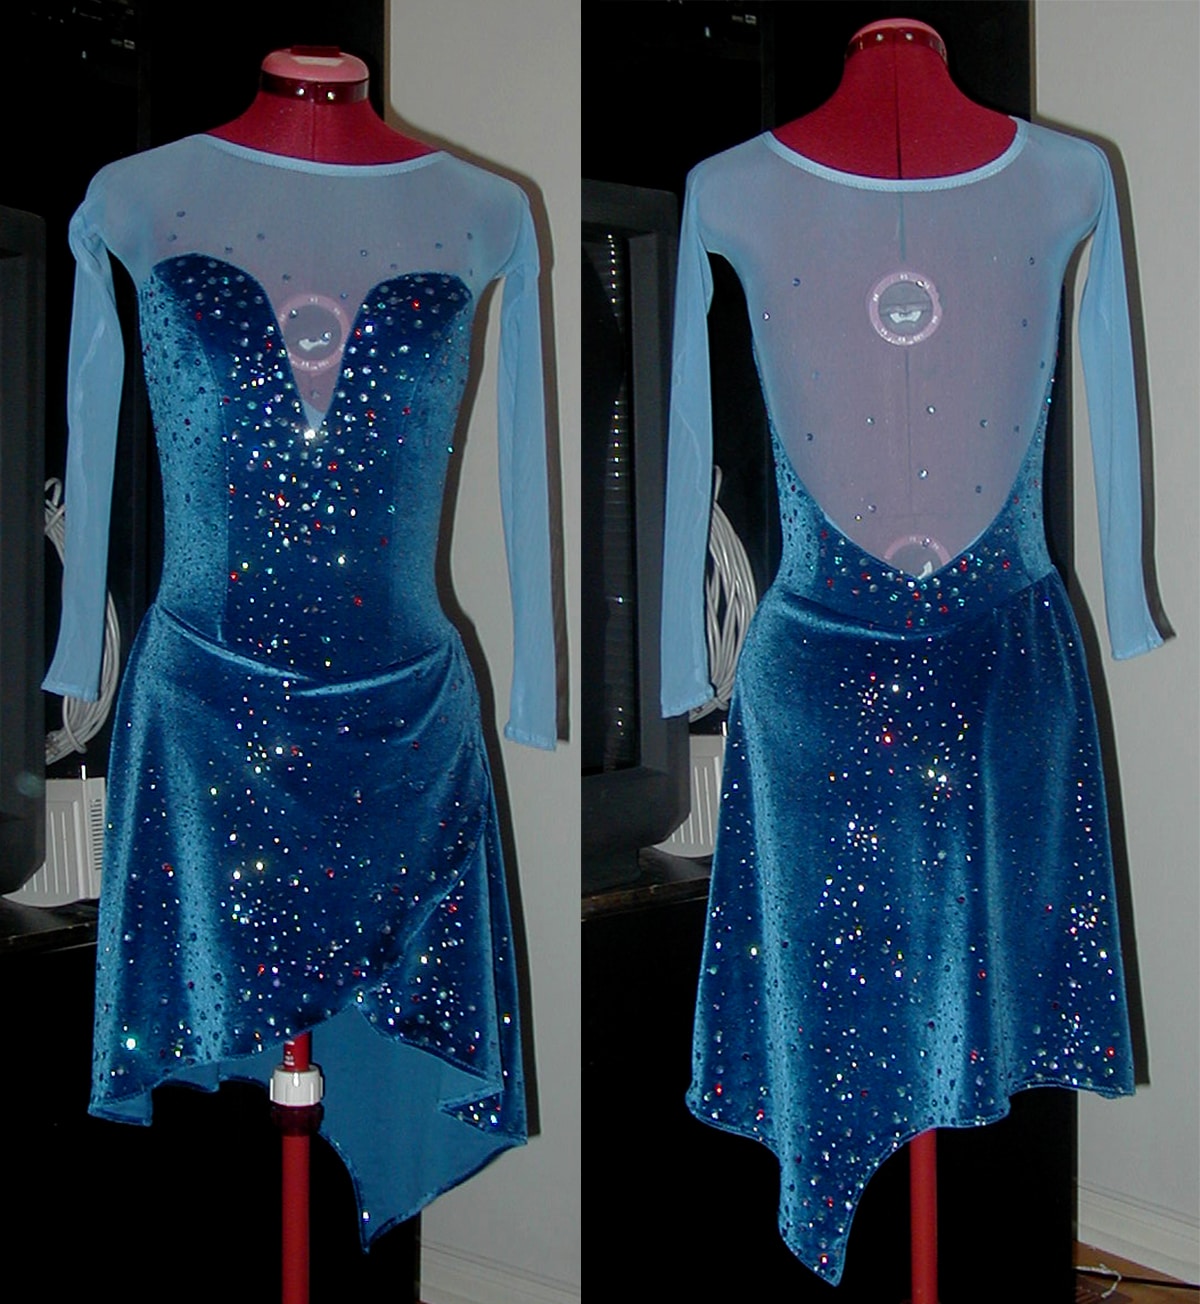 Front and back views of a blue ice dance dress. The main dress is velvet, and the top is mesh.